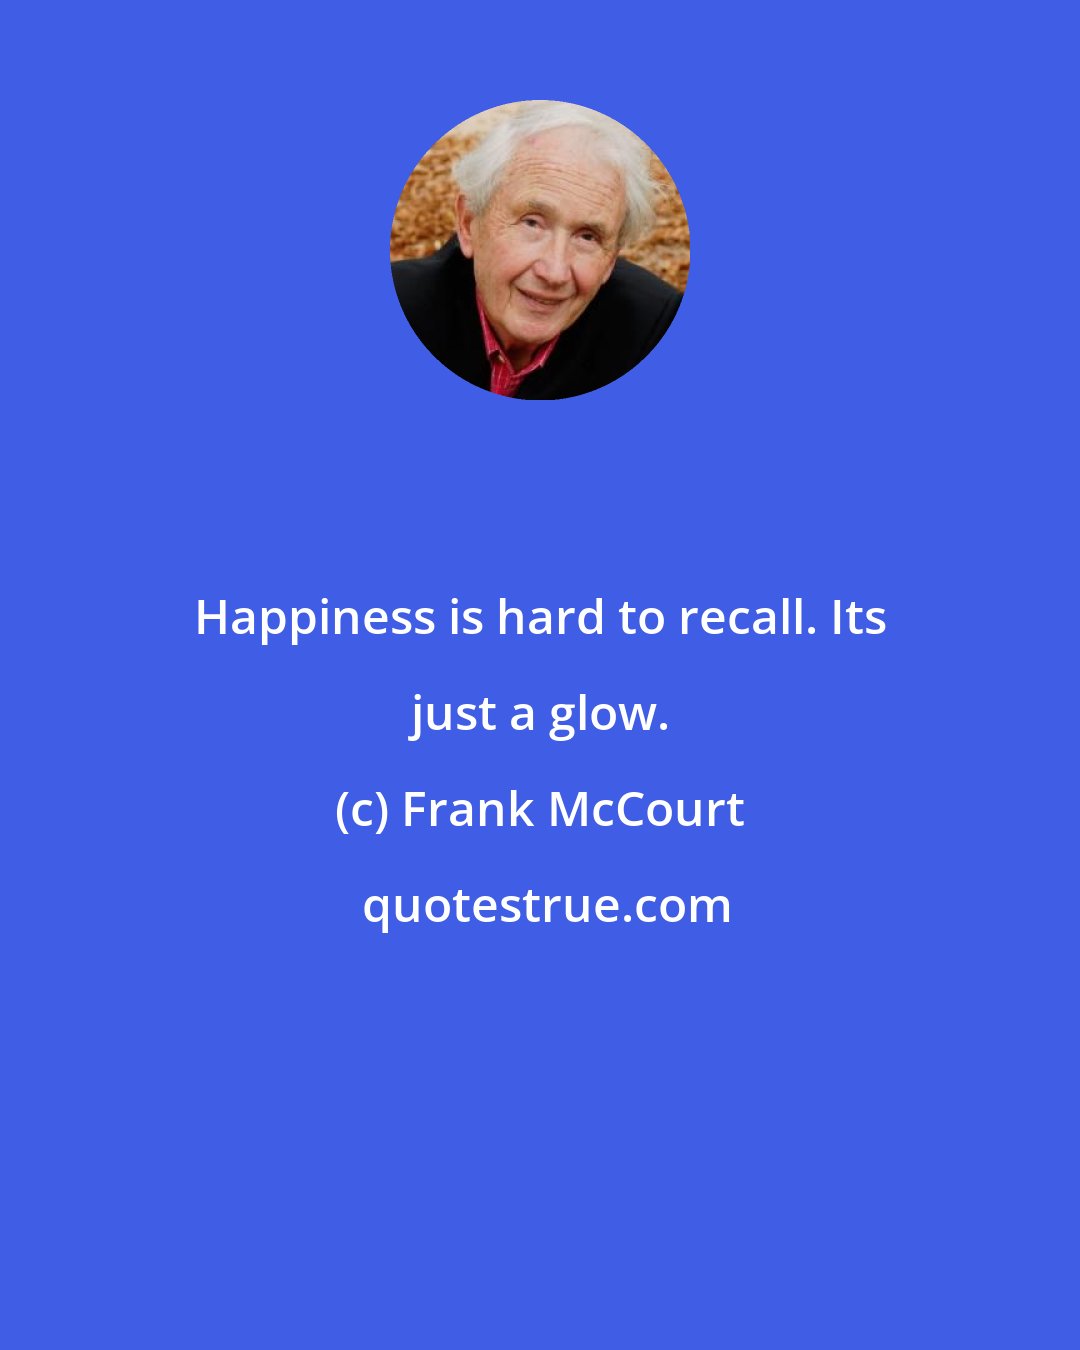 Frank McCourt: Happiness is hard to recall. Its just a glow.